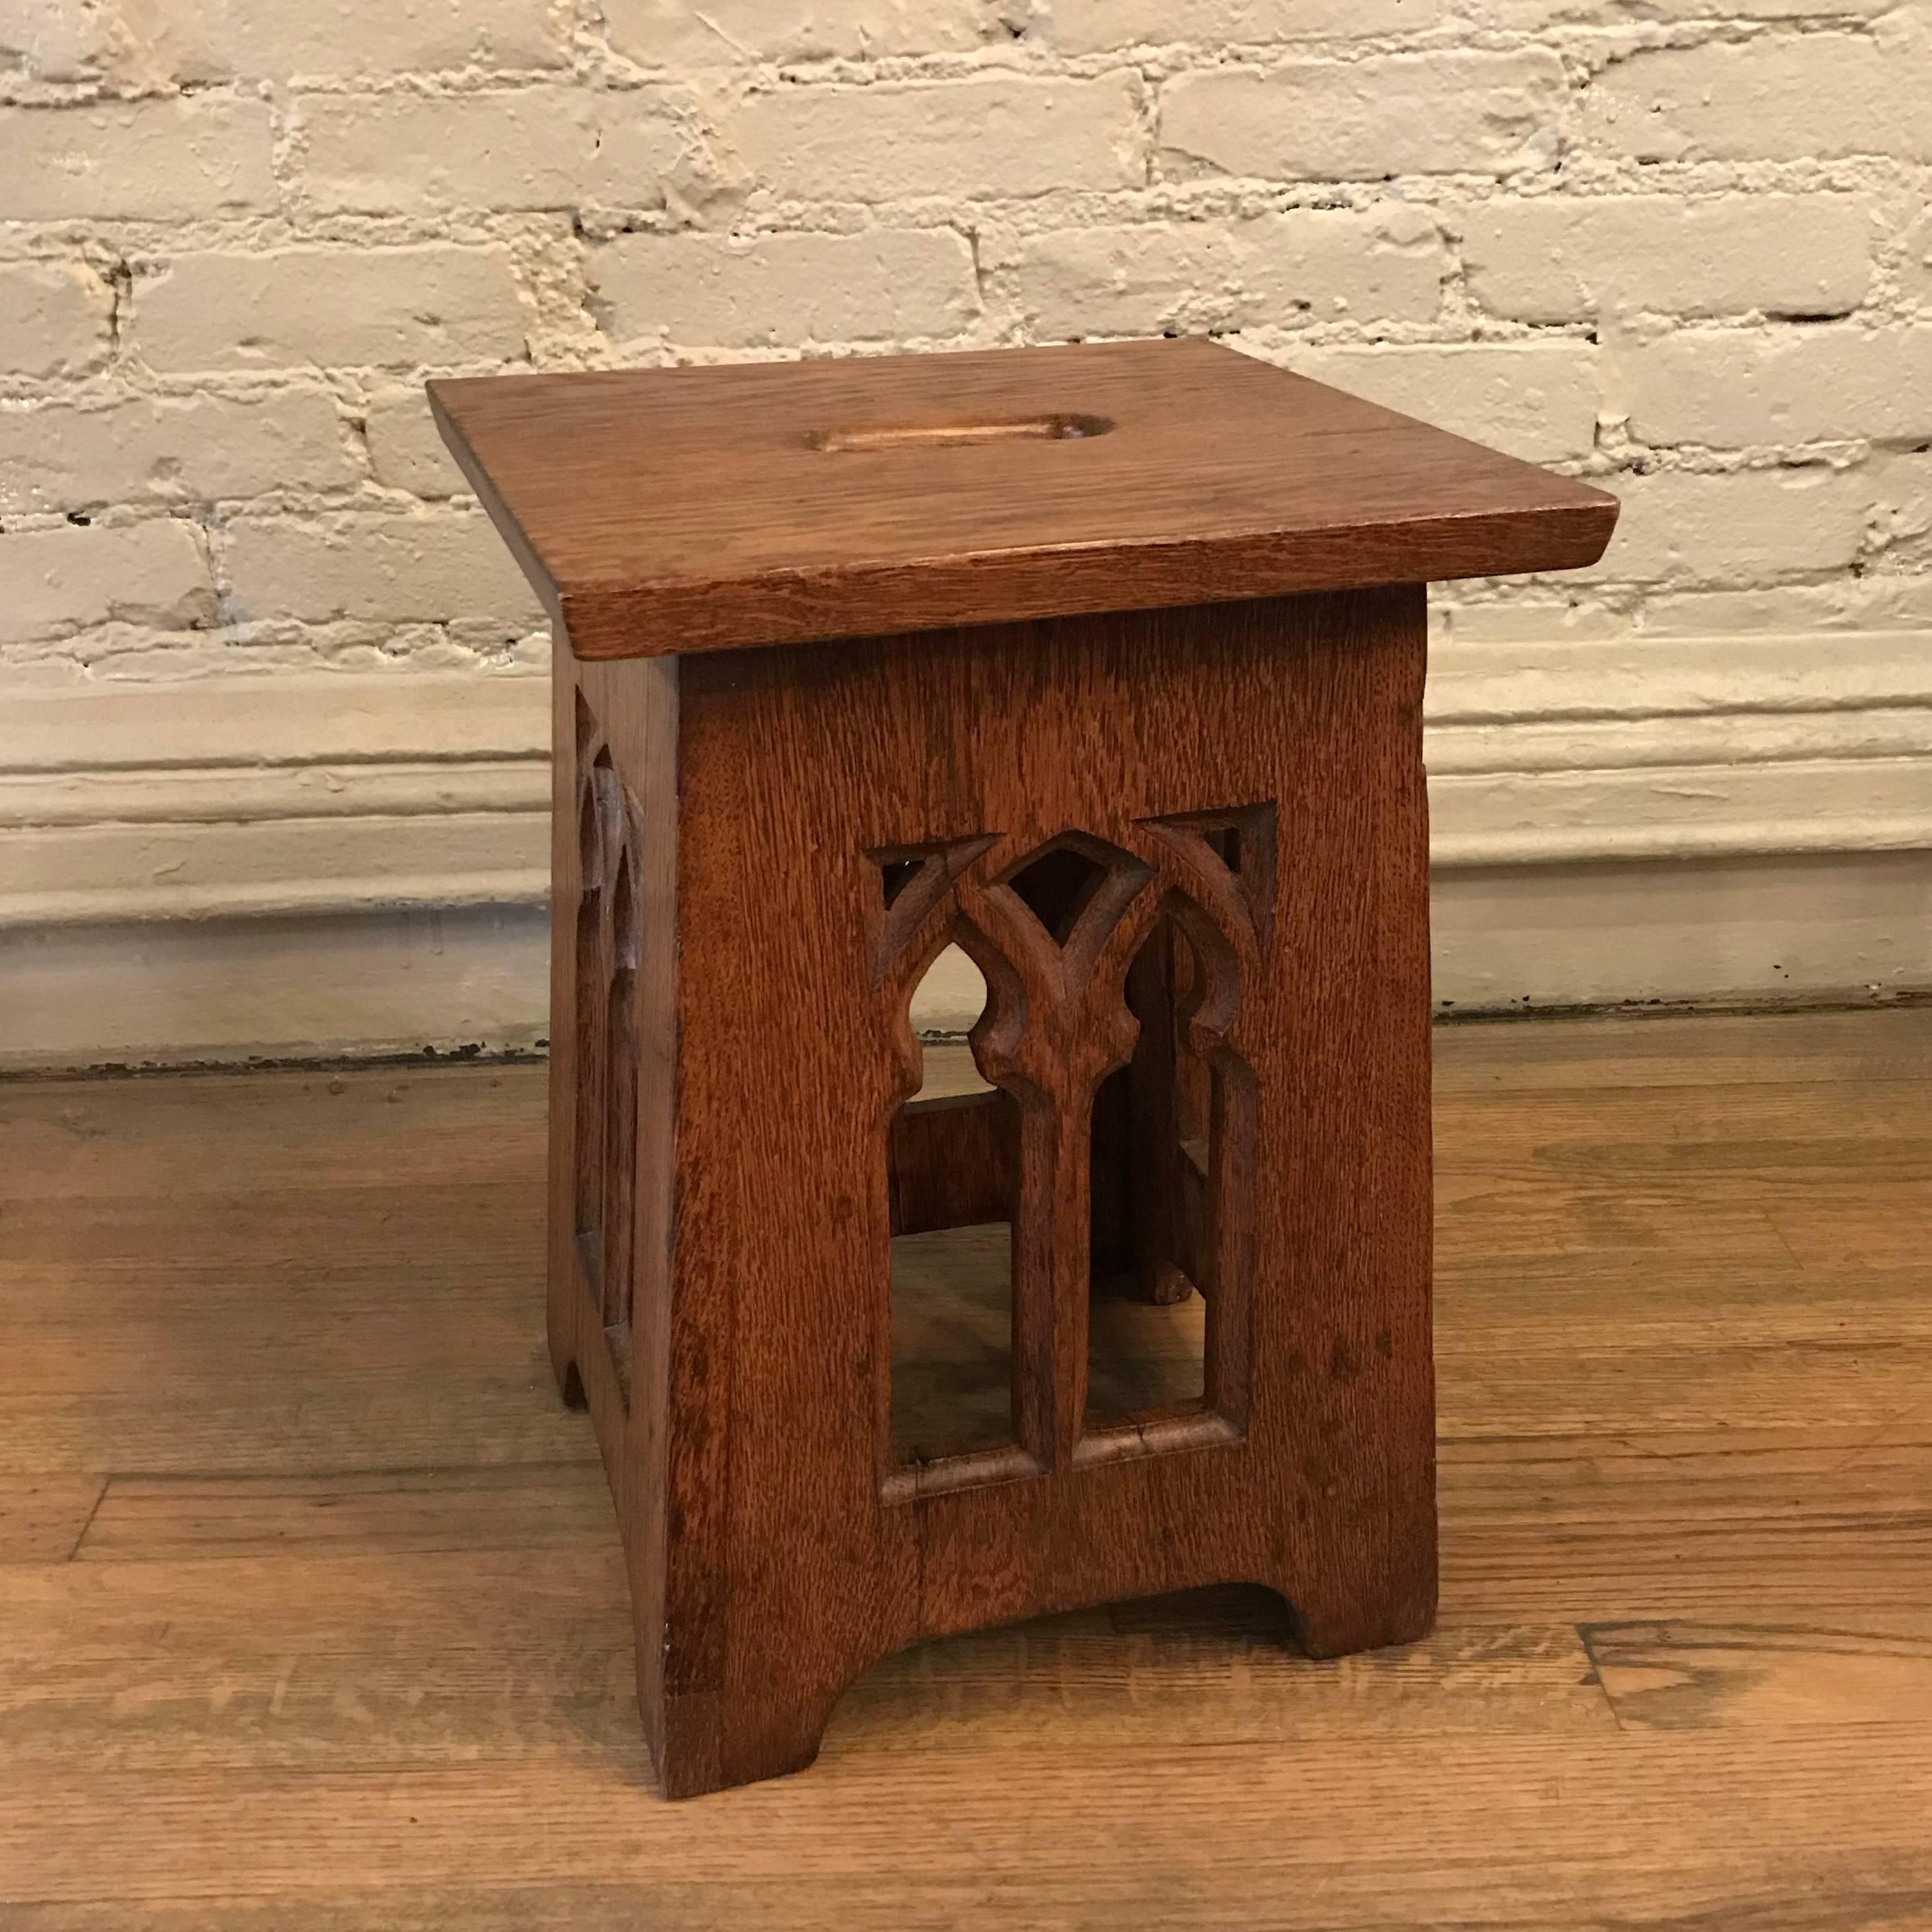 Gothic, oak, square stool used in a church or rectory, features carved, 